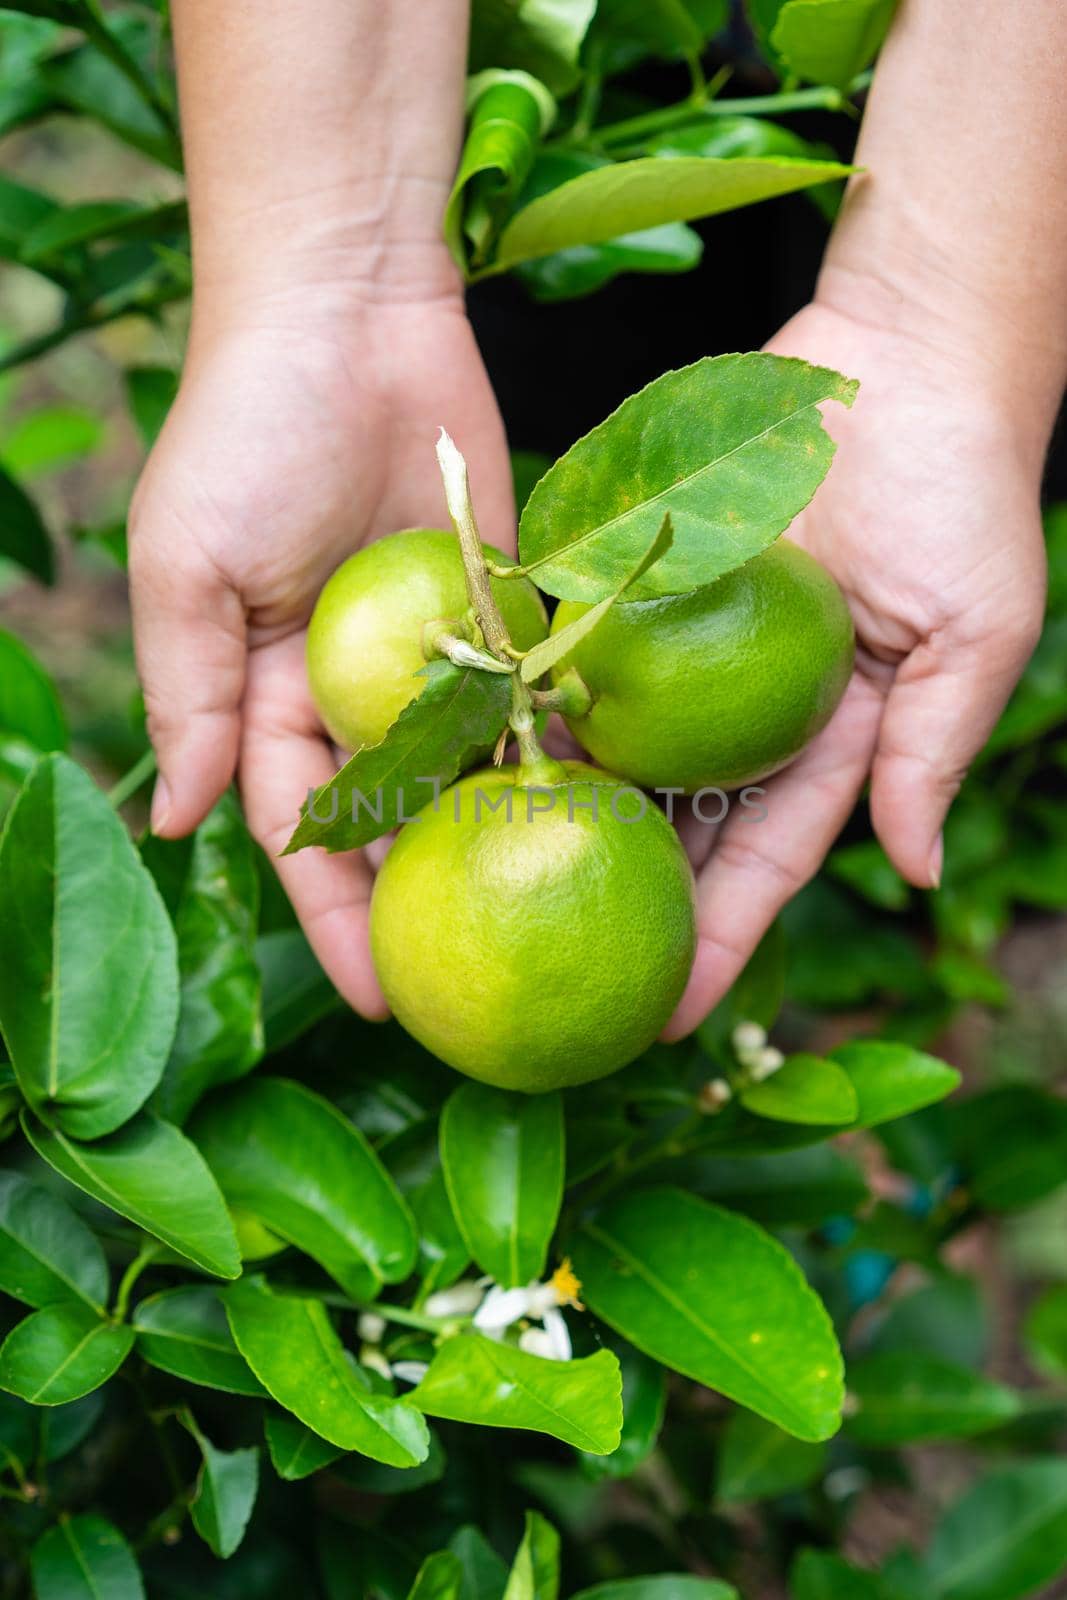 Green beautiful fresh limes in a woman's hand in the garden by domonite